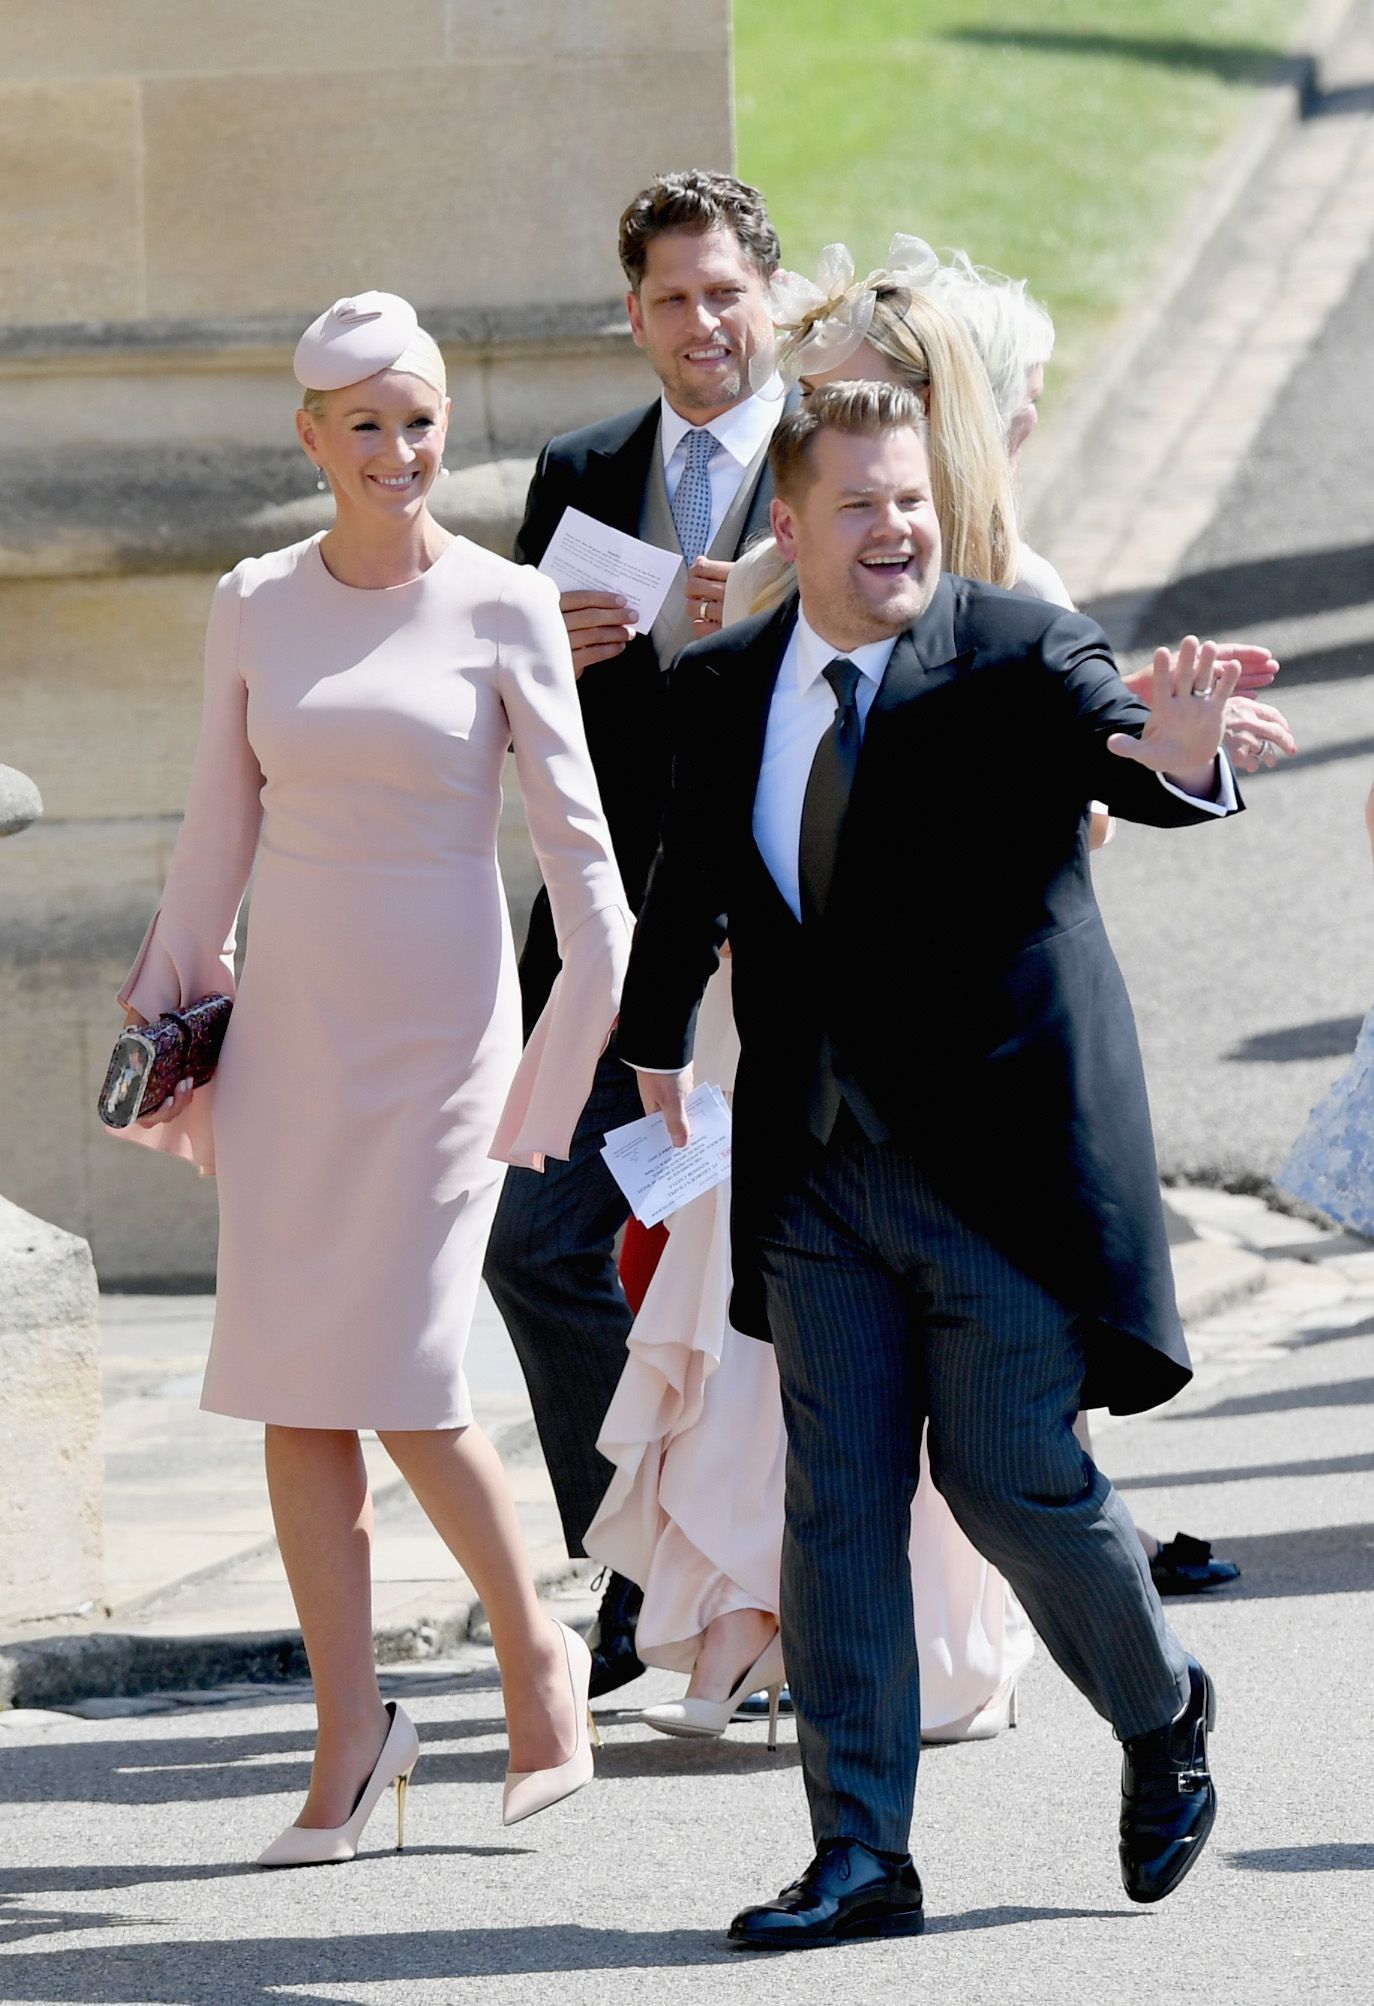 Carey Corden's parents - James and Julia - at Prince Harry and Meghan Markle's wedding